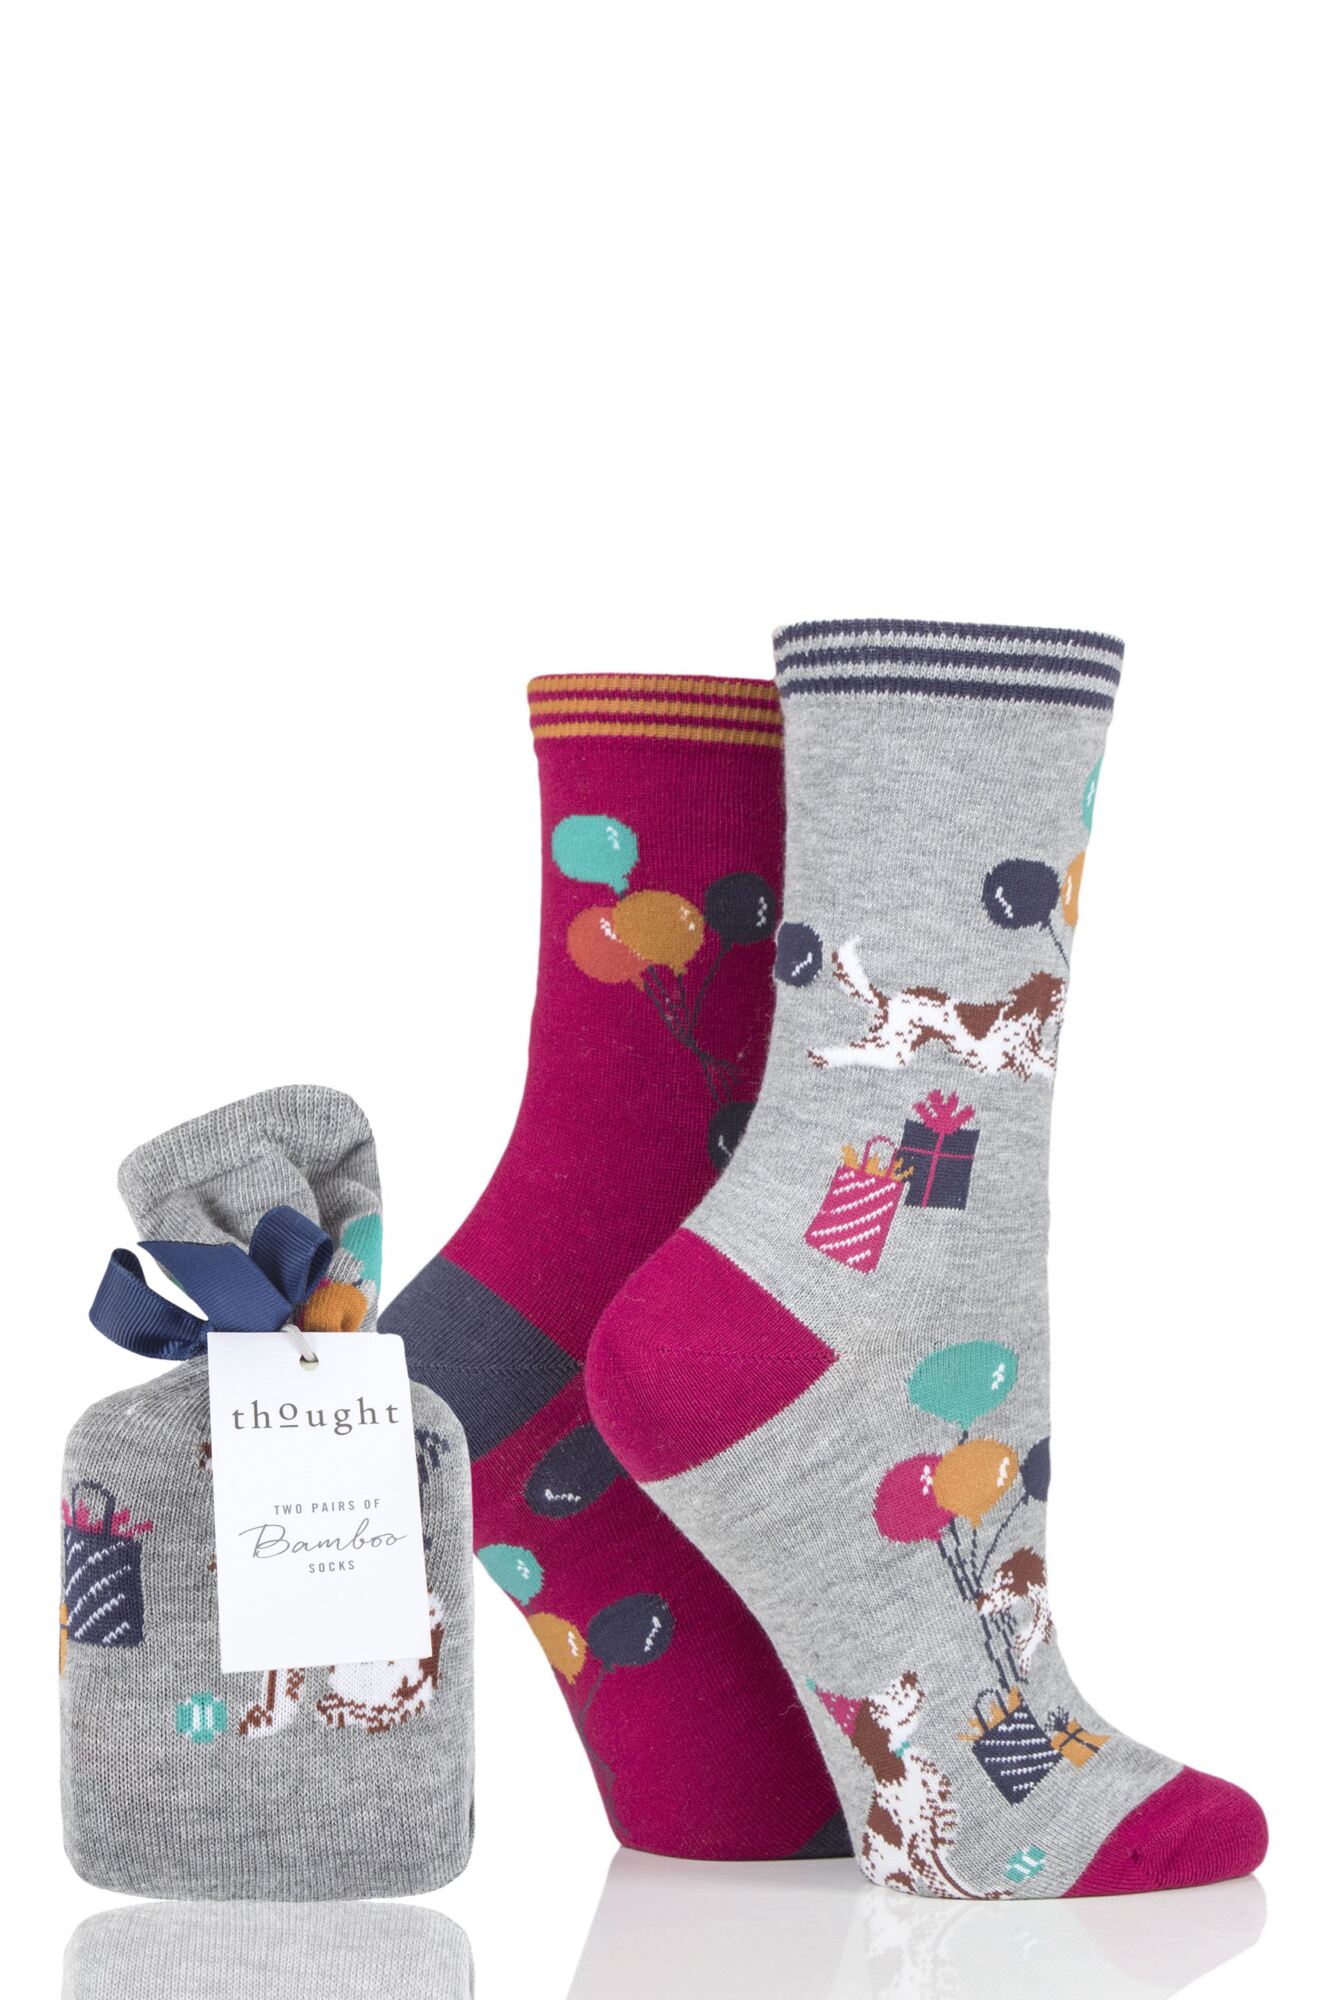 Ladies 2 Pair Thought Eve Party Dog Bamboo and Organic Cotton Gift Bagged Socks